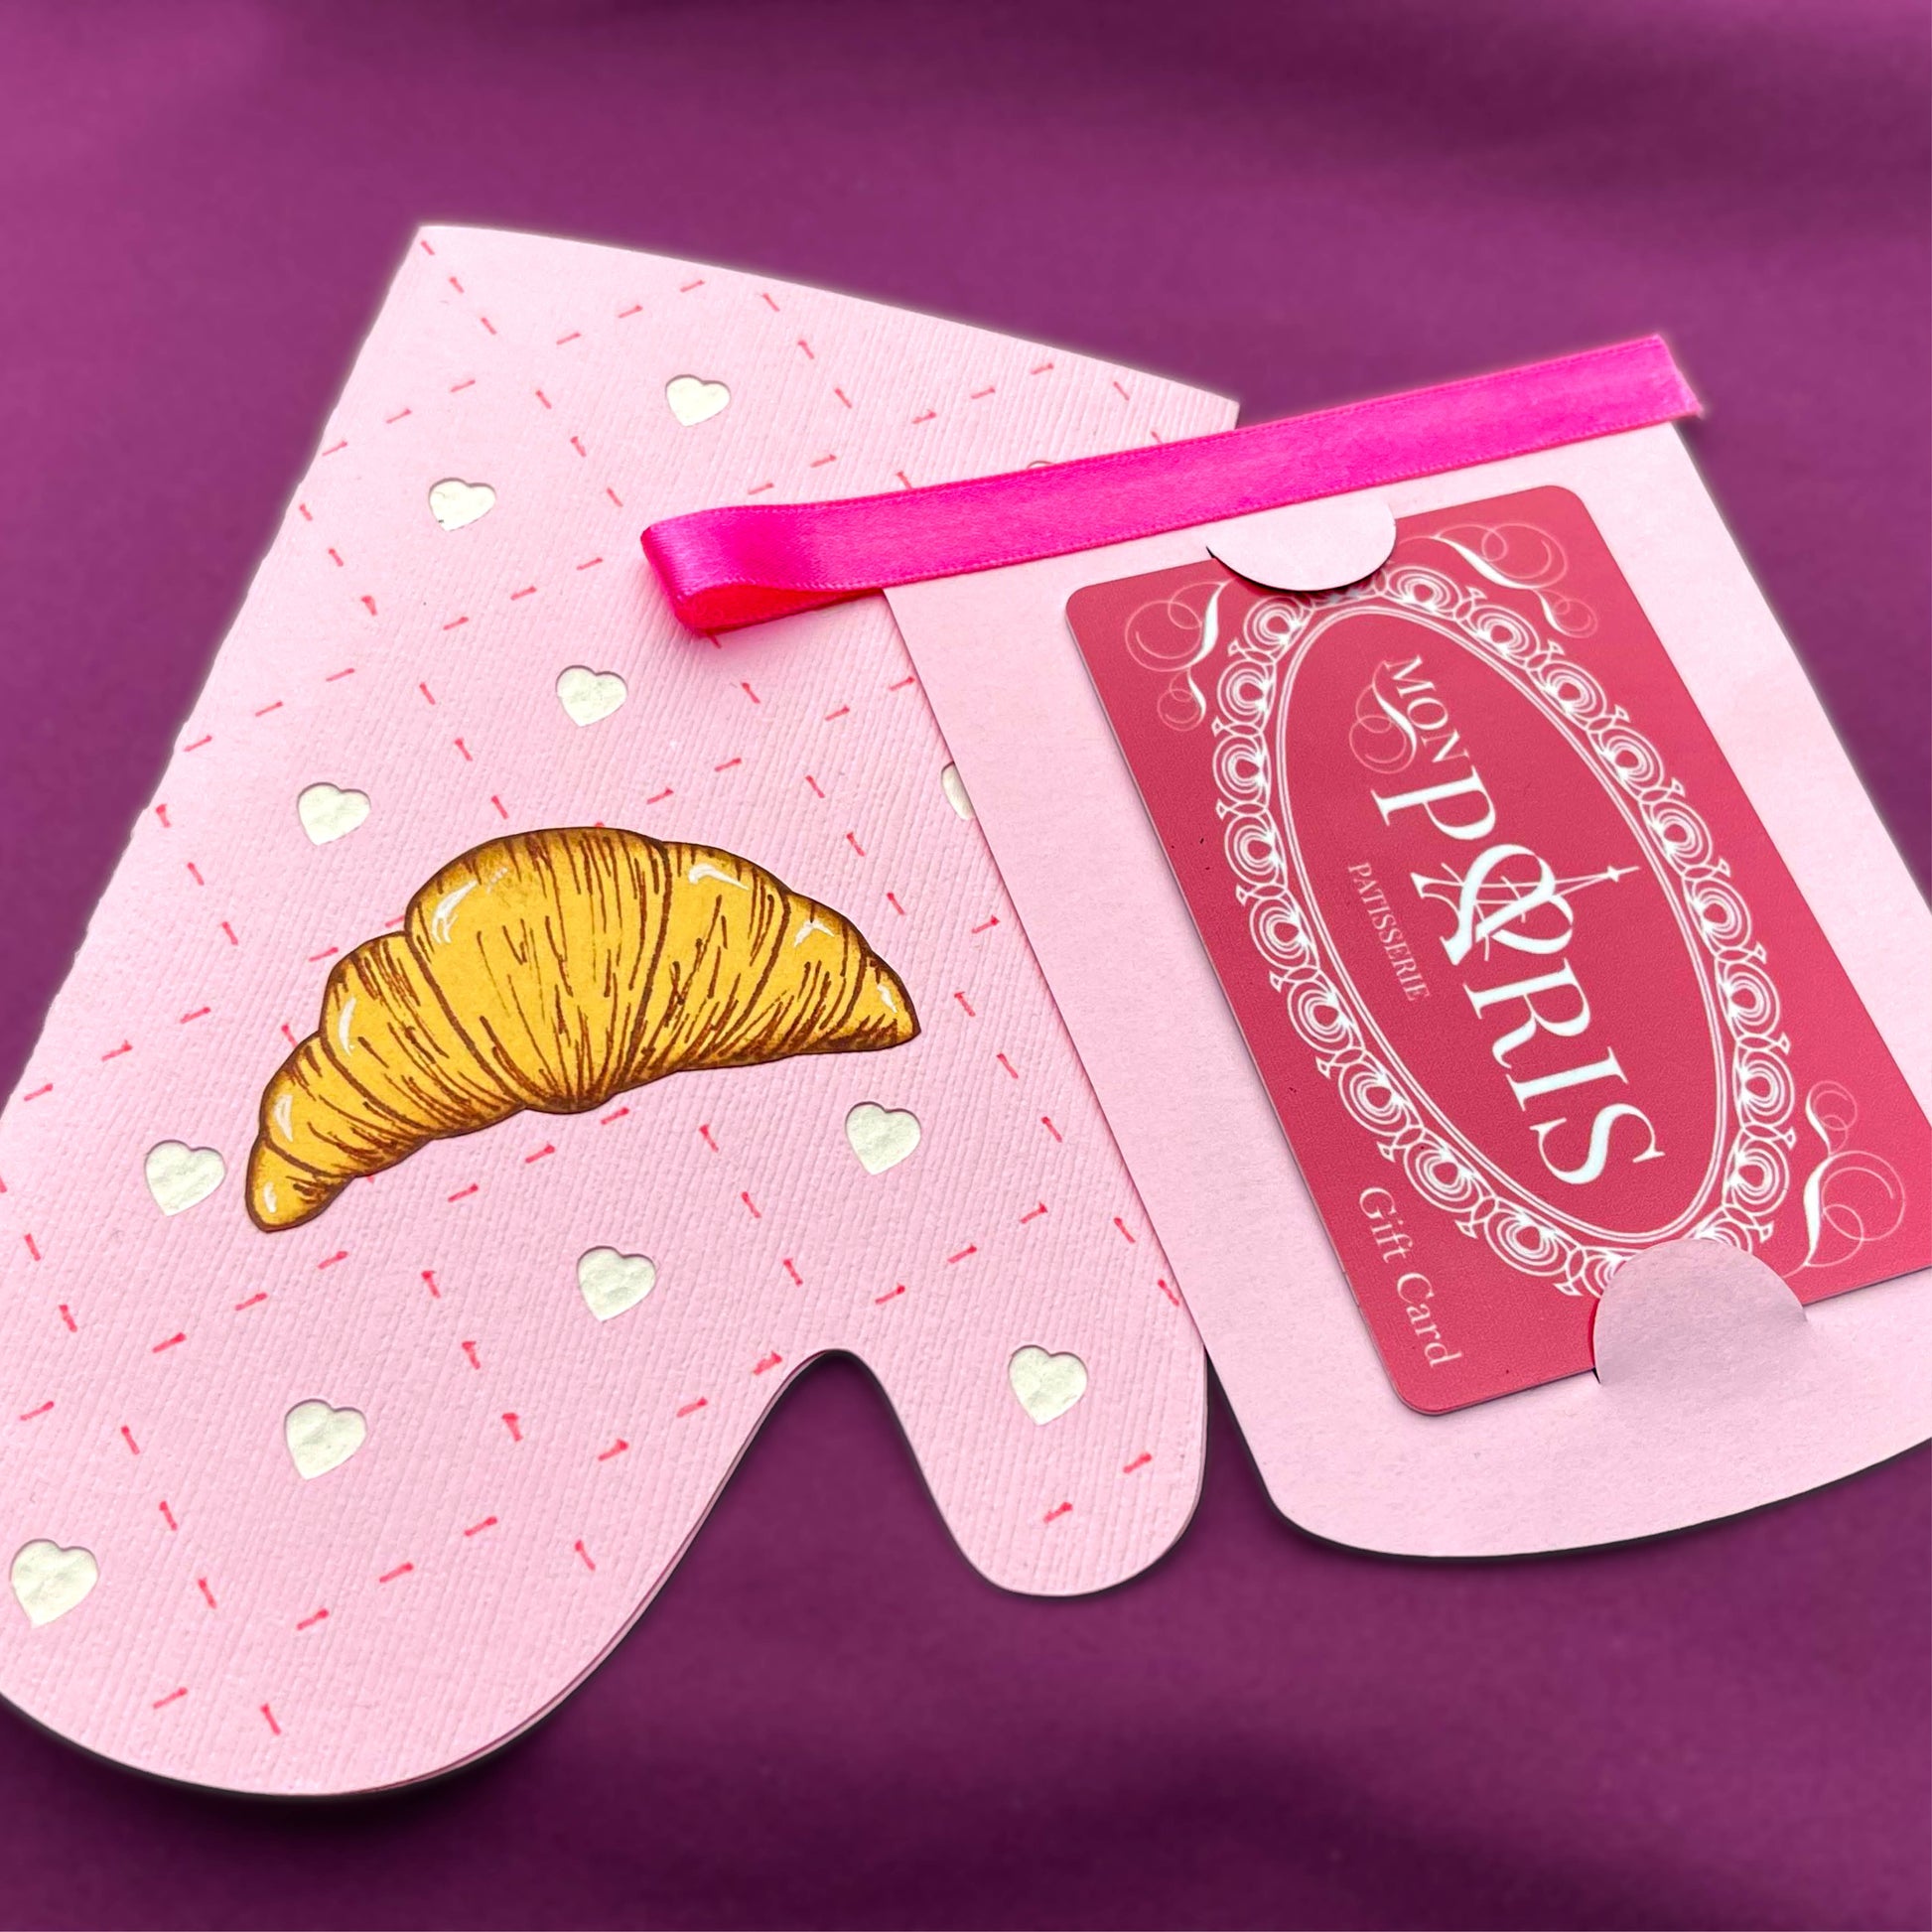 oven mitt gift card holder SVG for Mother's Day, Teacher Appreciation, Thank You, birthday